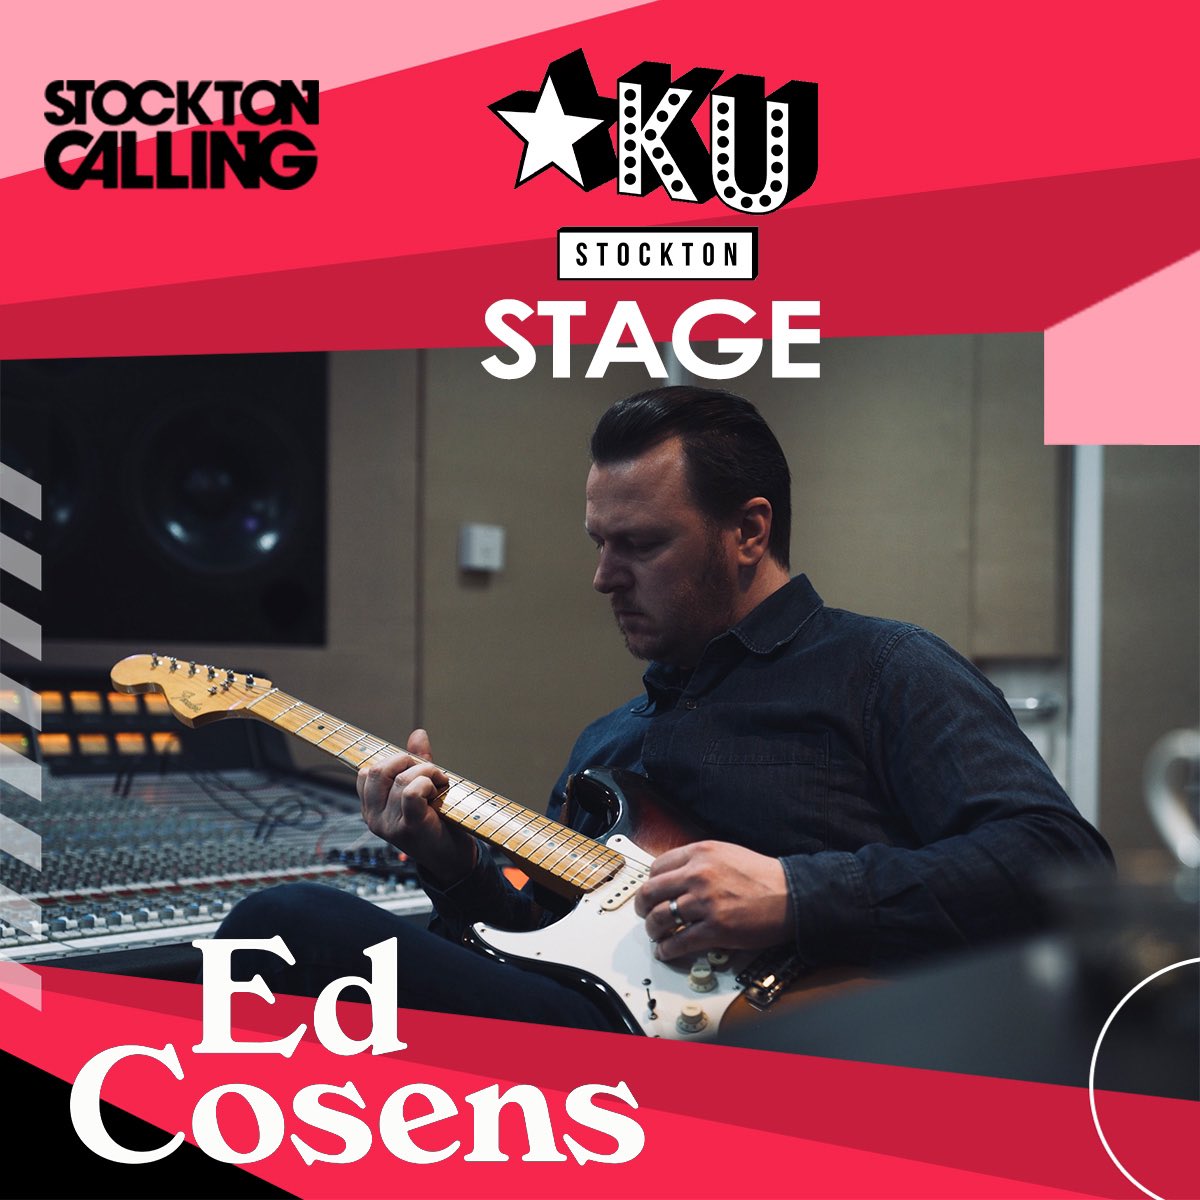 Heading up to Stockton for the fab @StocktonCalling festival on March 30th. Grab a ticket now before they go, loads of top acts playing… shout up if you’re coming? stocktoncalling.co.uk